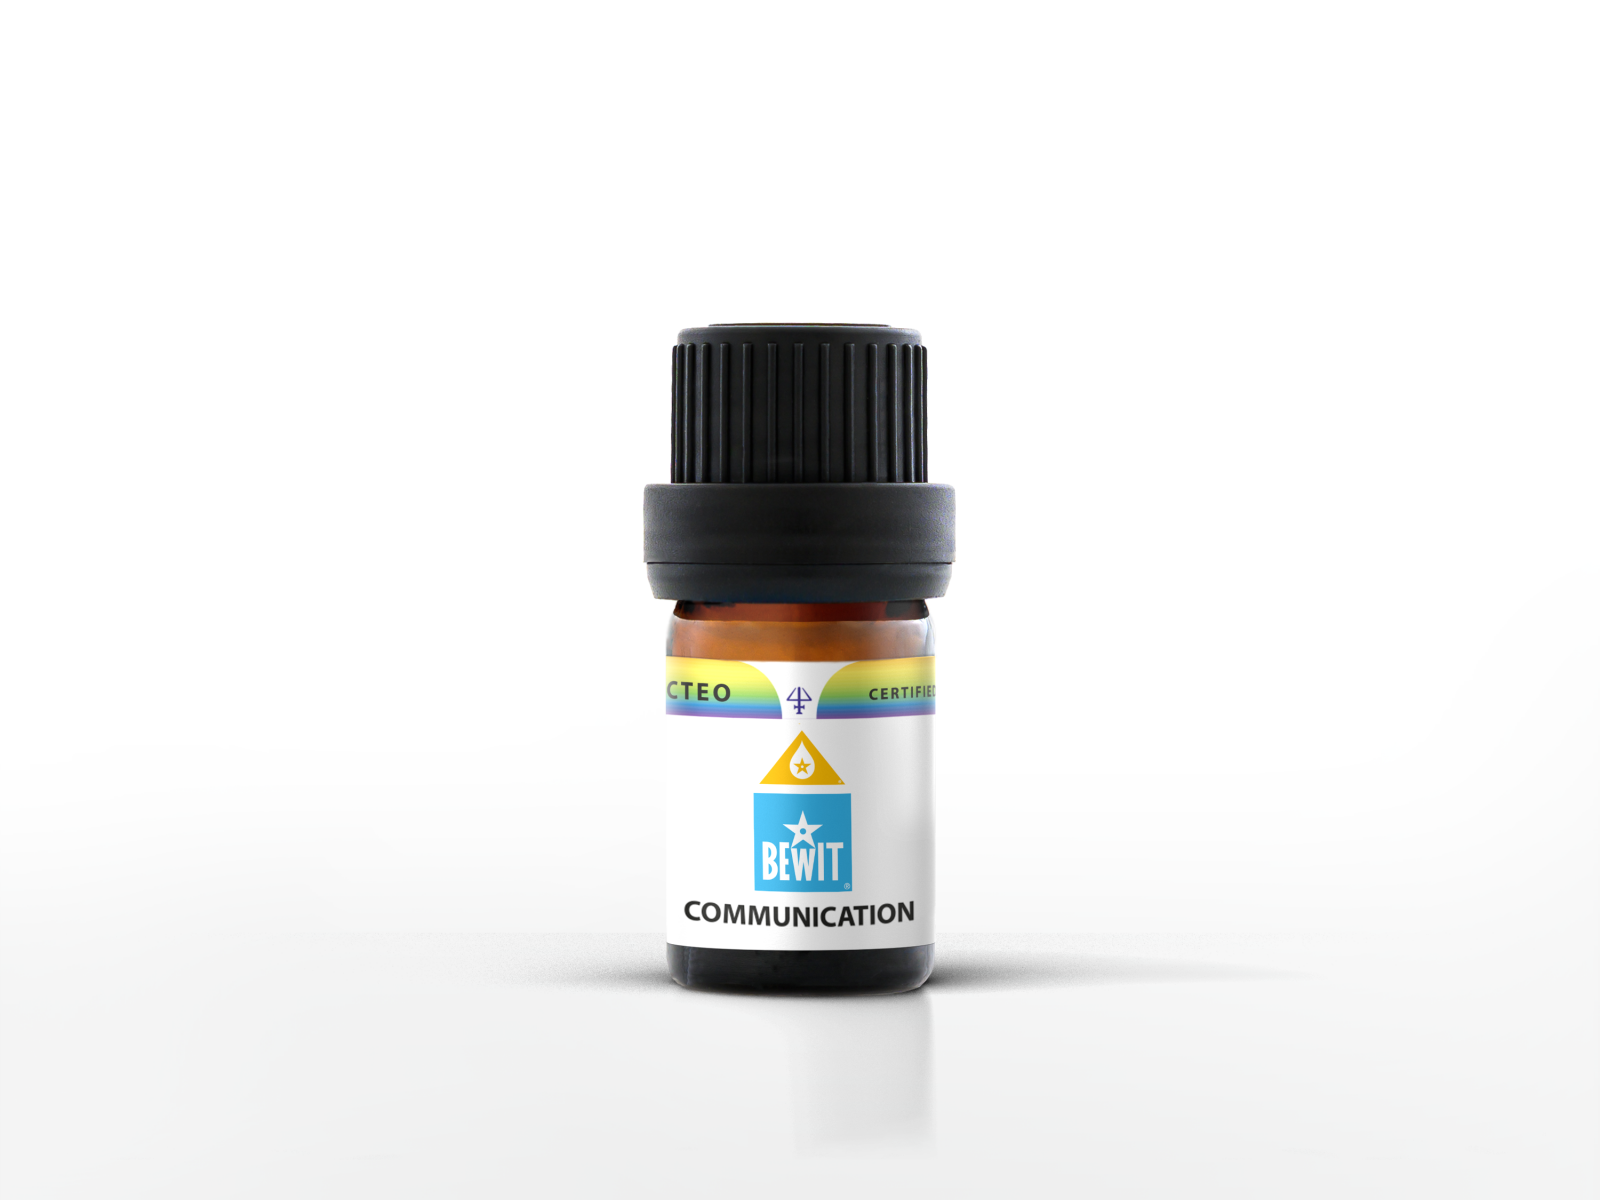 BEWIT COMMUNICATION - Blend of essential oils - 2